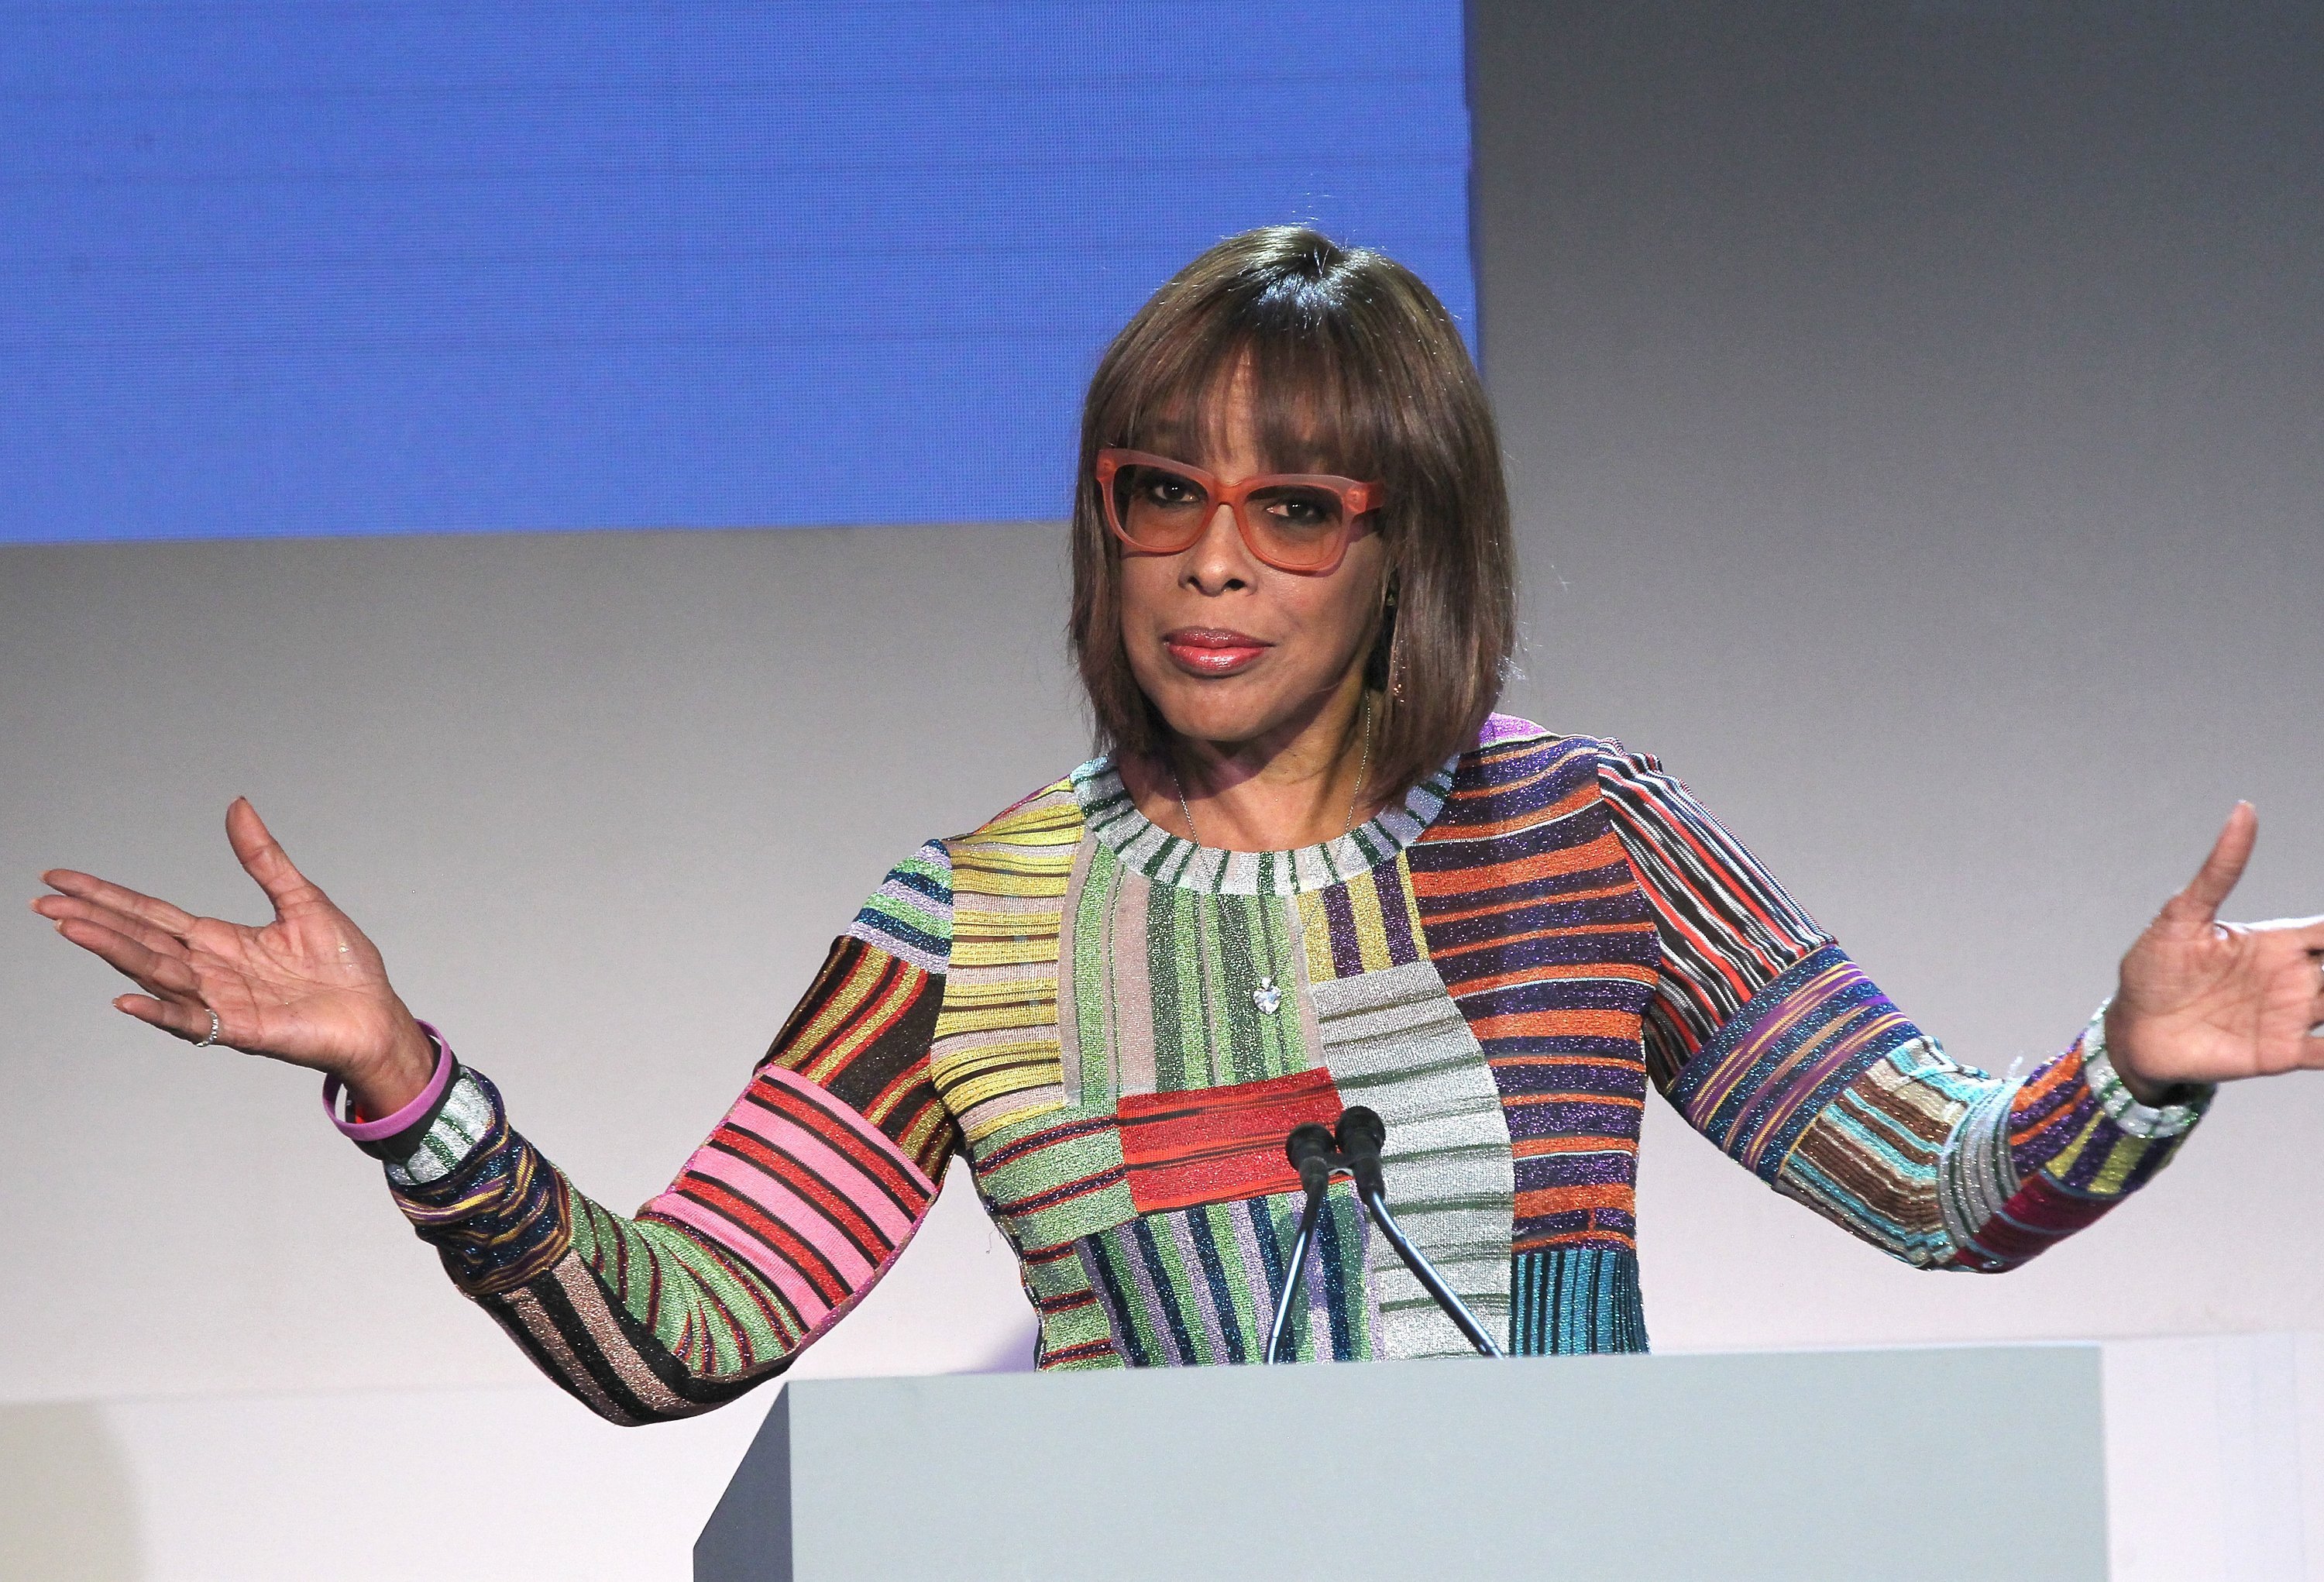 Gayle King at a speaking engagement in November 2018. | Photo: Getty Images